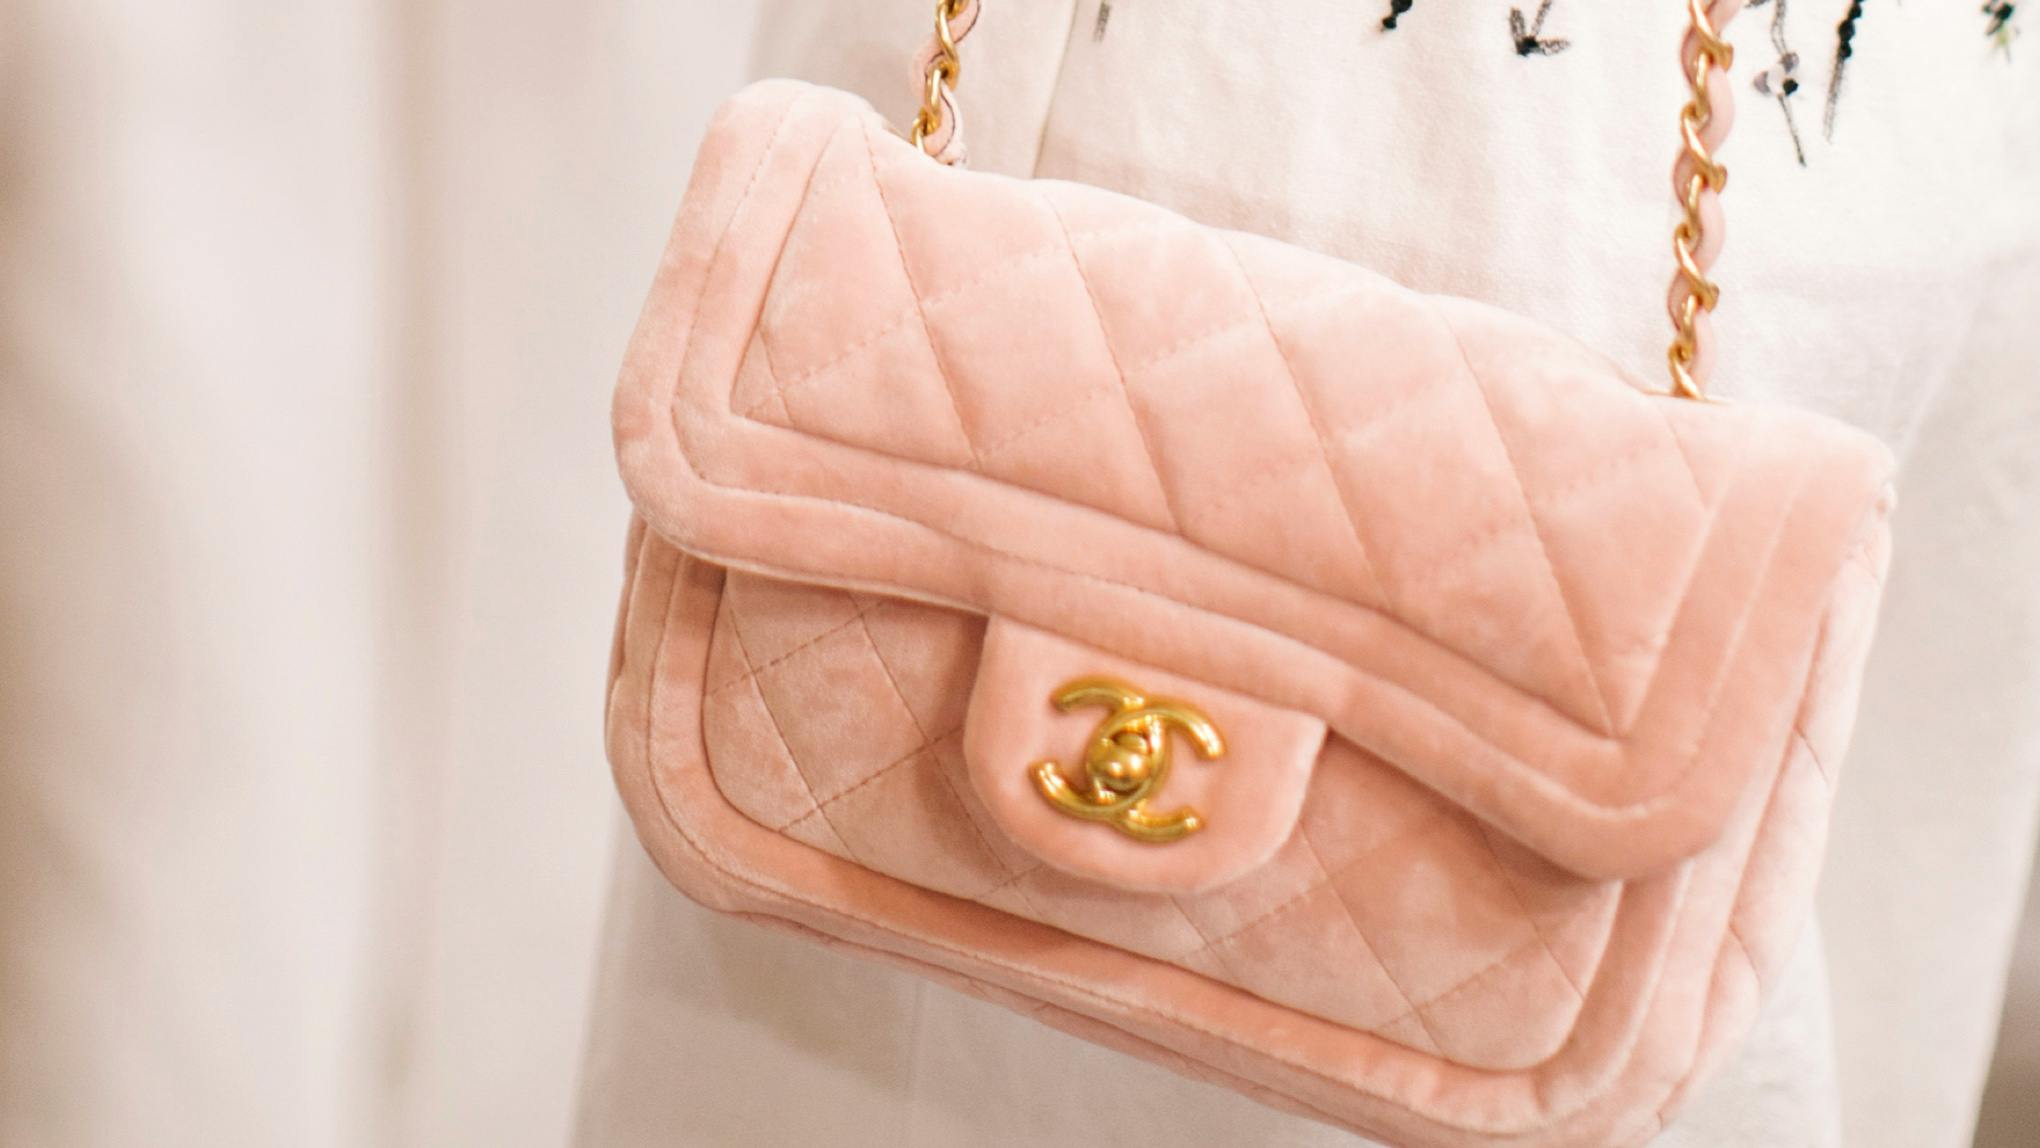 Accessories from the CHANEL Cruise 2021/22 collection